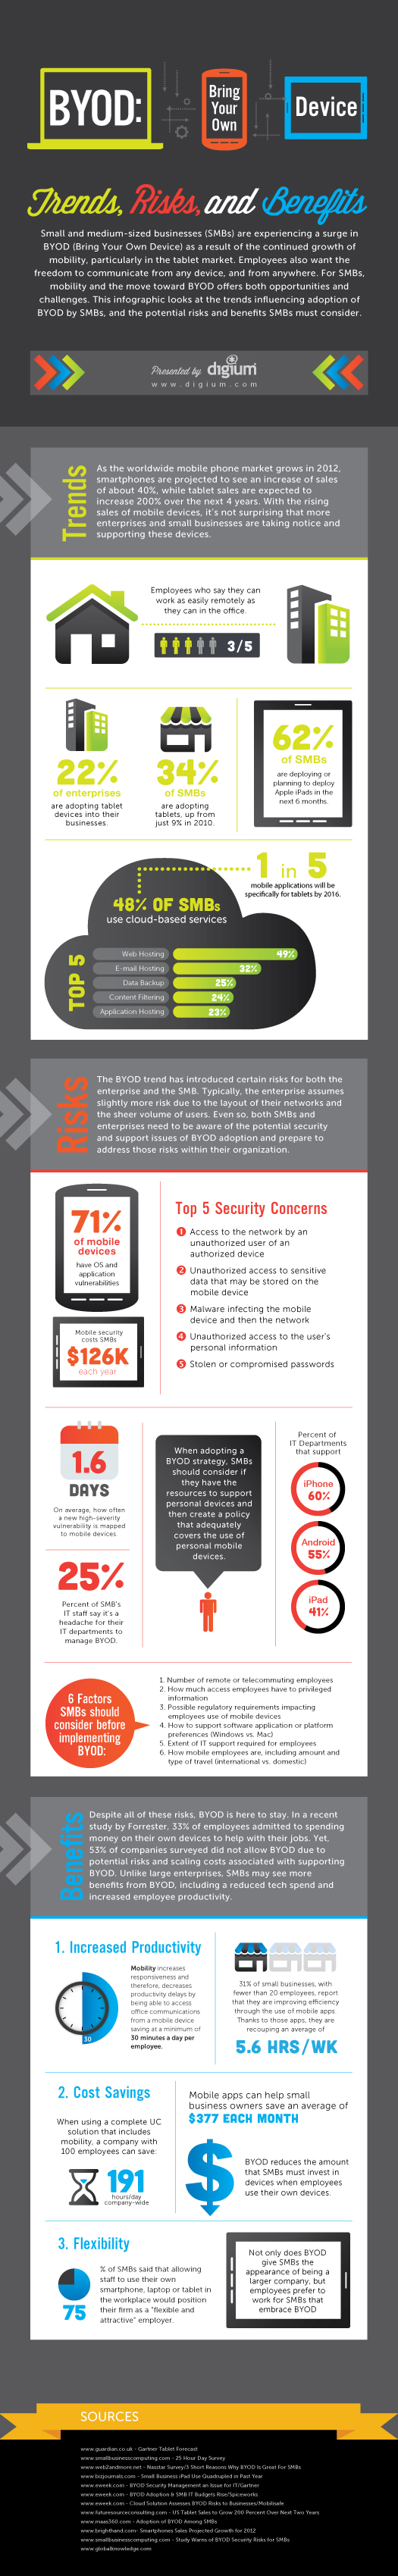  BYOD for SMBs: Trends, Risks and Benefits [Infographic]